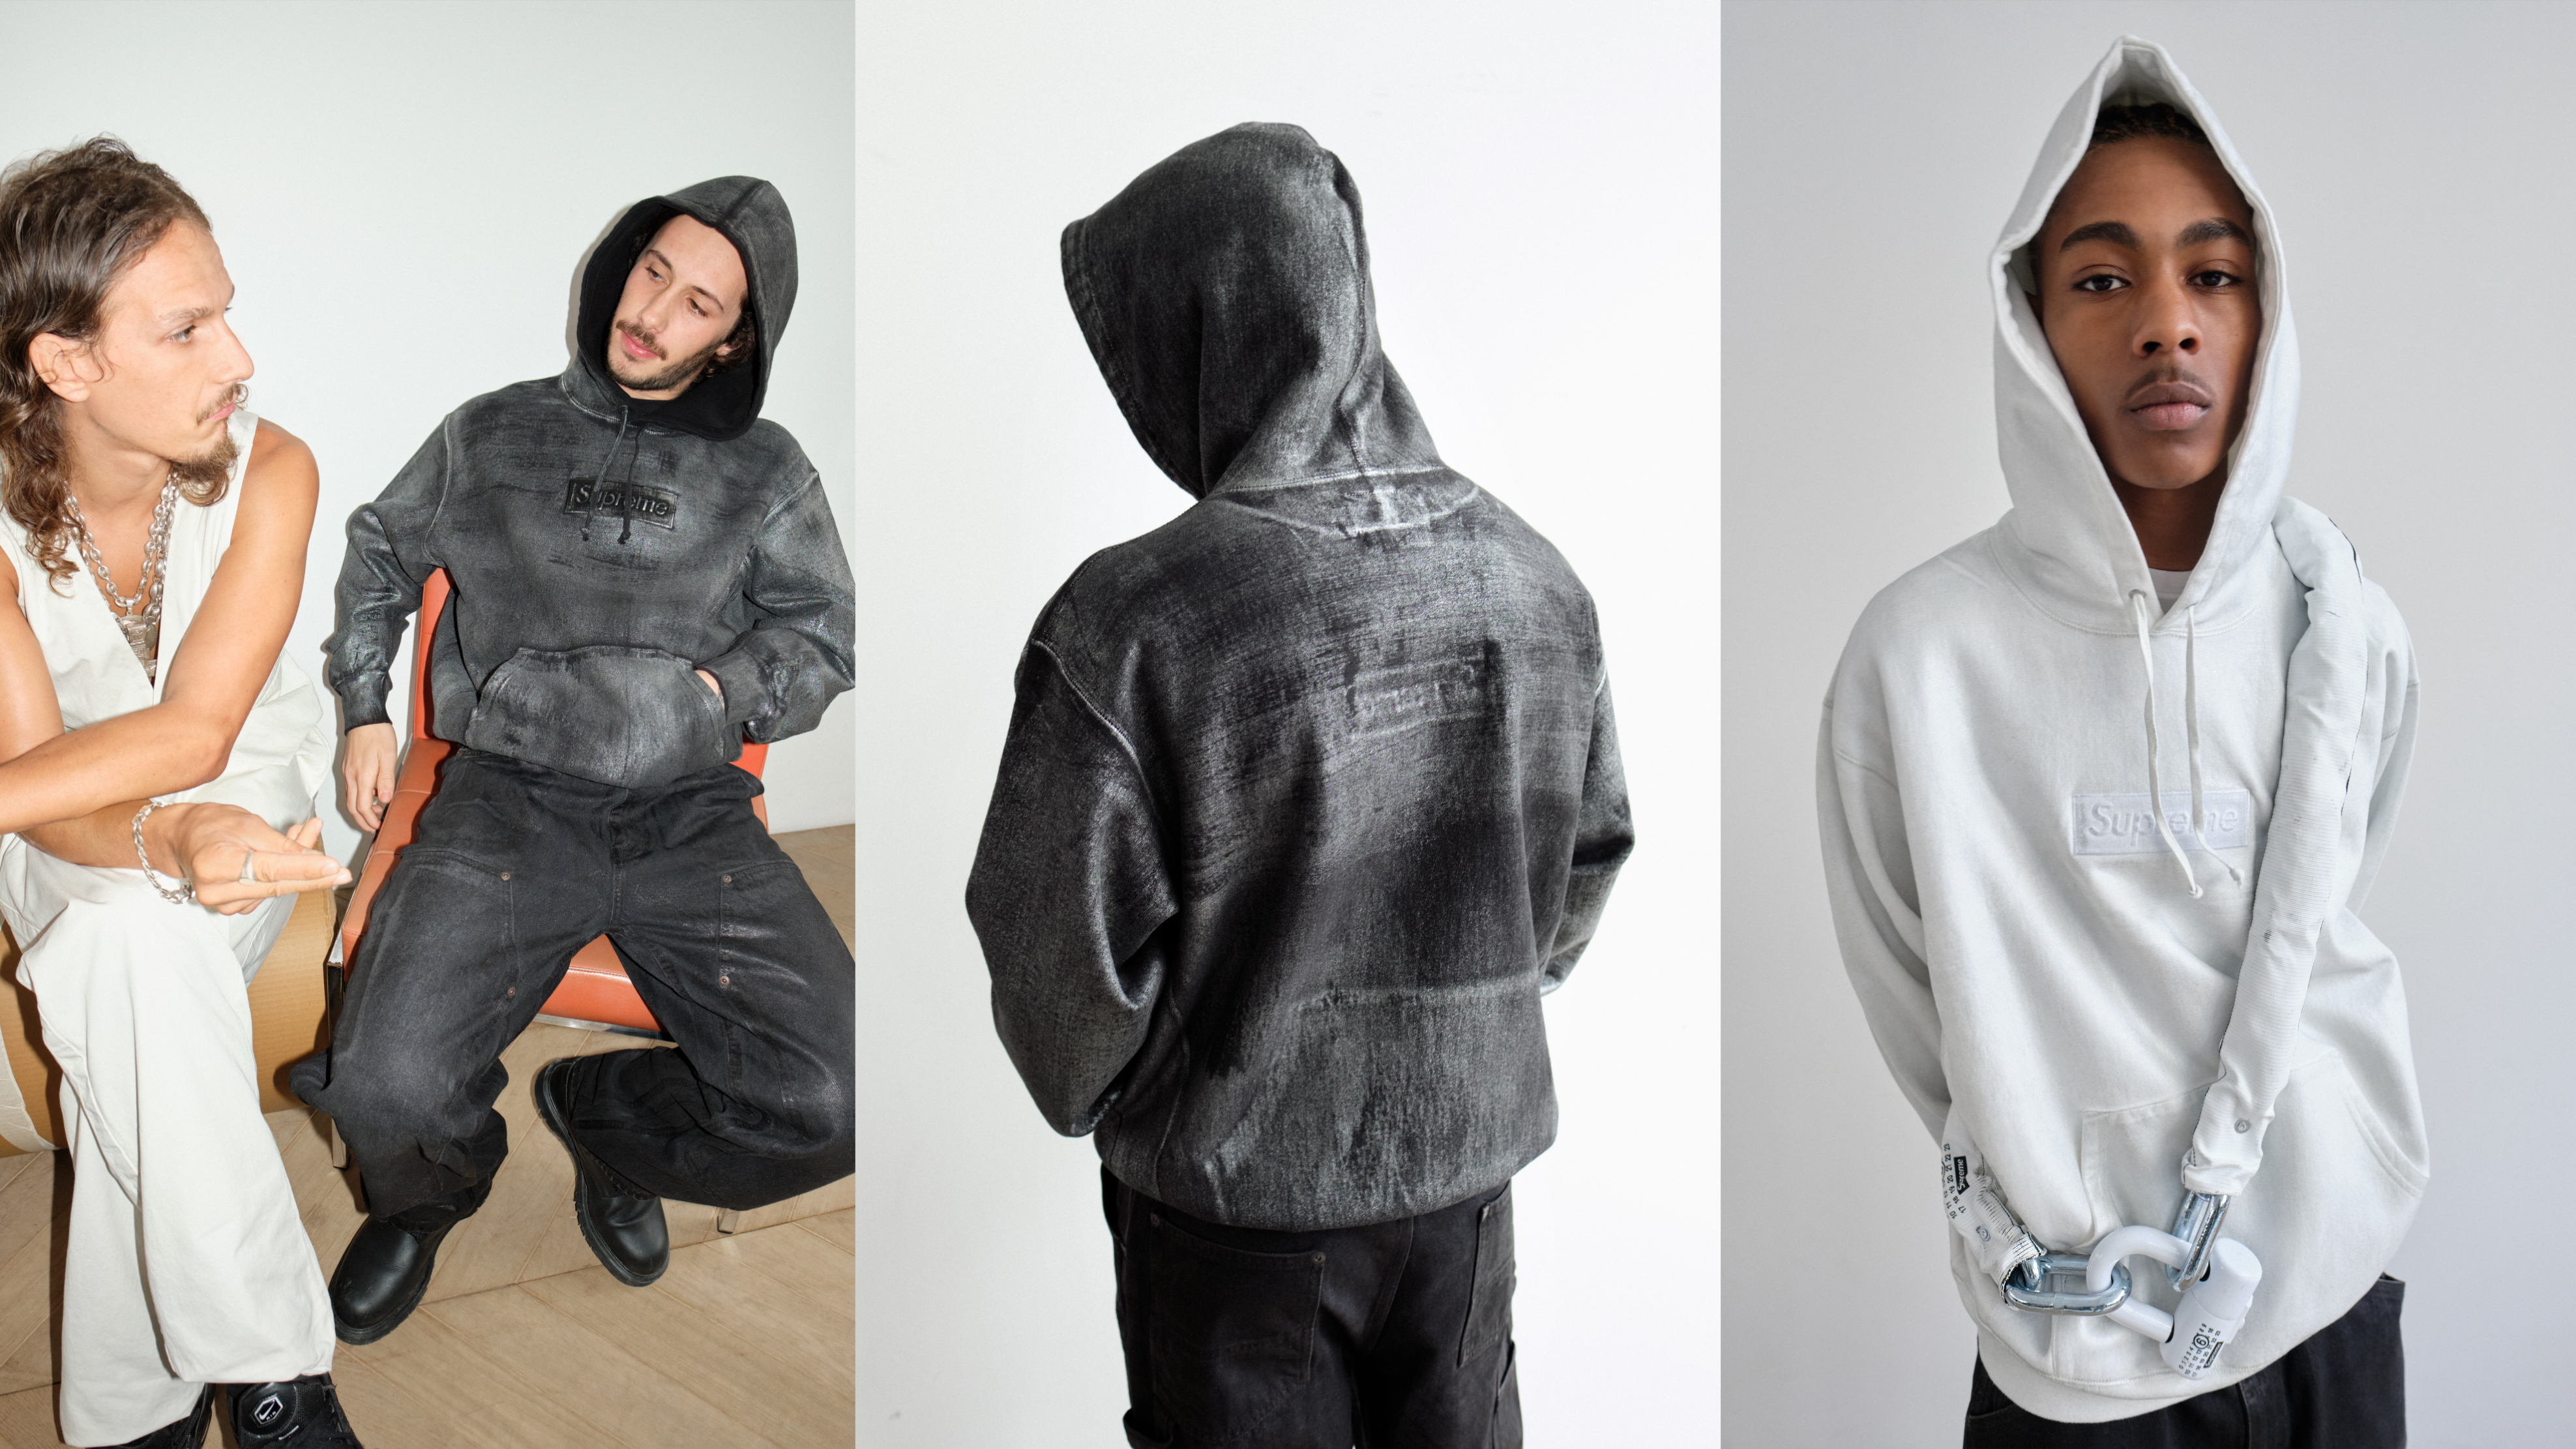 Three models showcasing different styles of textured hooded sweatshirts